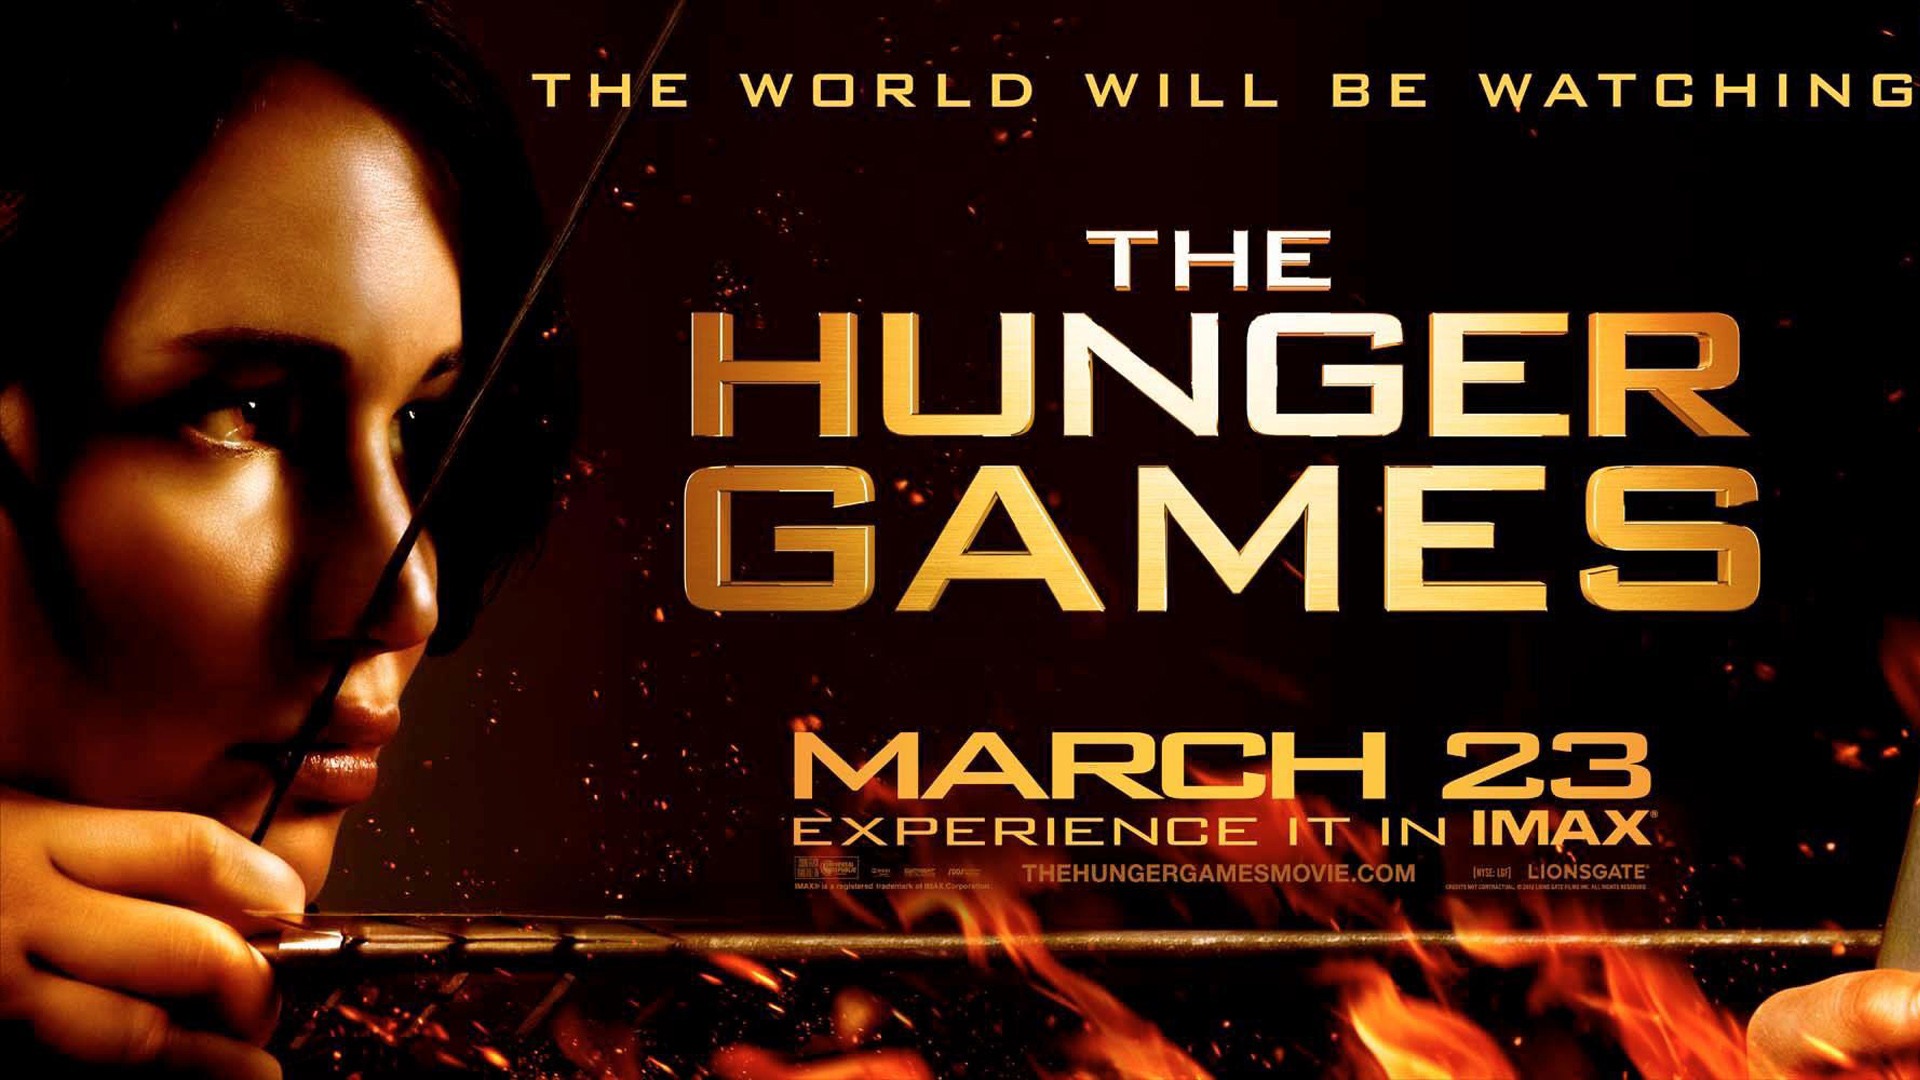 The Hunger Games HD wallpapers #5 - 1920x1080